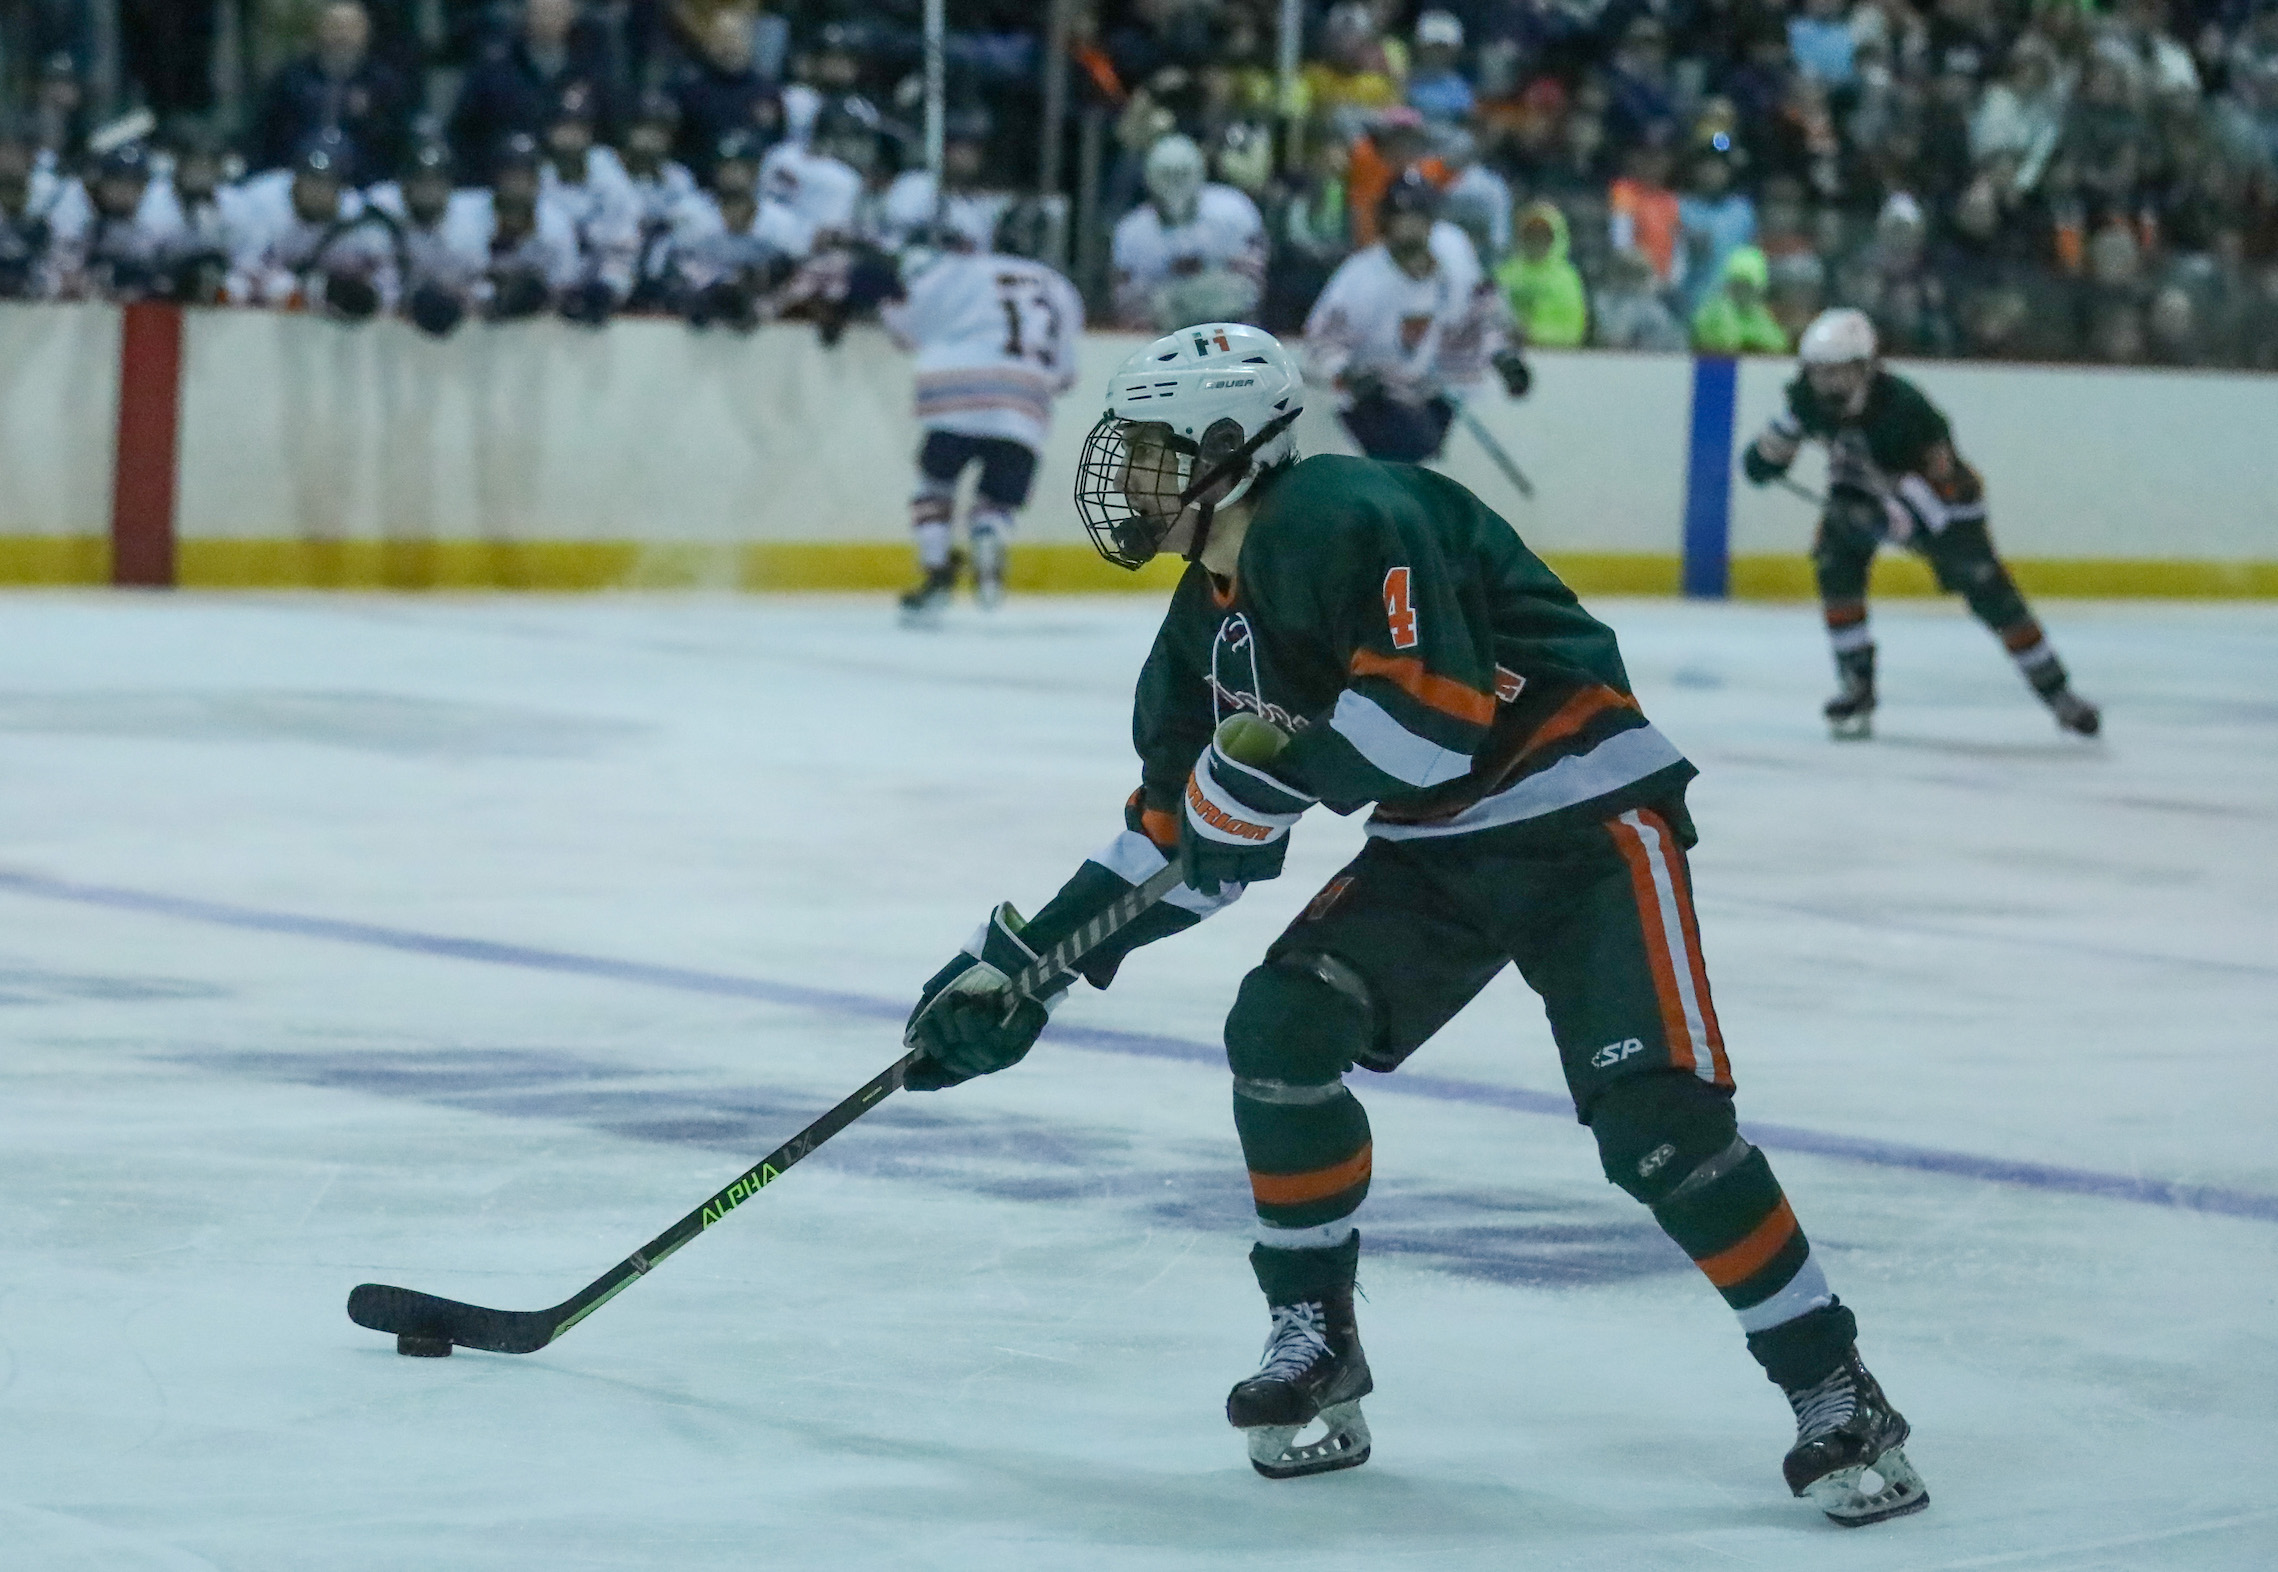 HHS boys hockey routs Walpole, advances to state title game